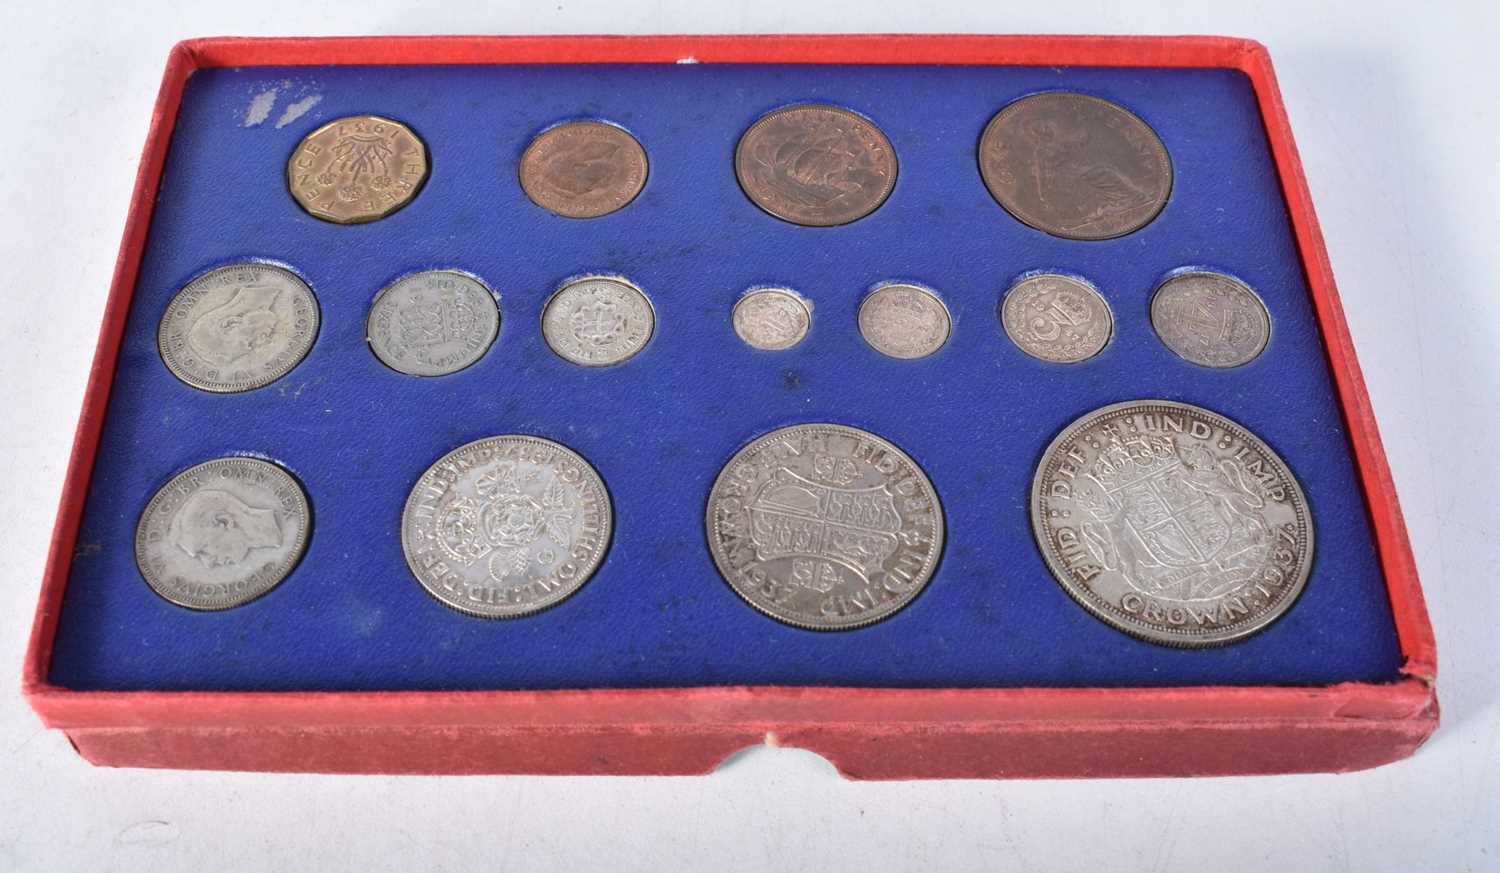 UK 1937 GEORGE VI MAUNDY 15 COIN SET.  INCLUDES: CROWN , HALF CROWN , FLORIN , SCOTTISH AND